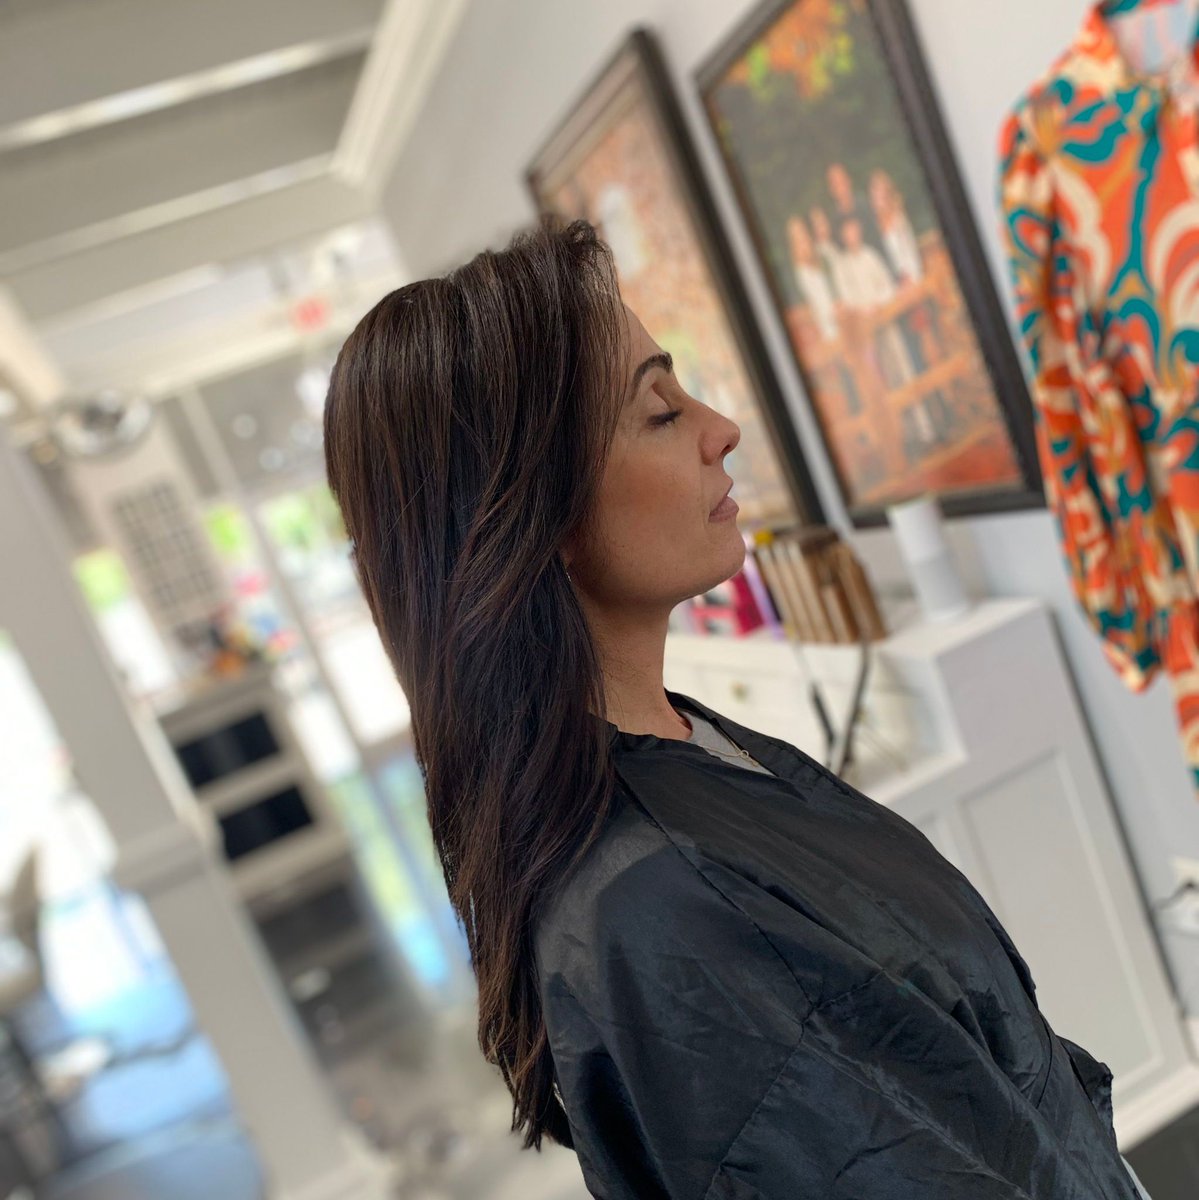 Tammy saw Ava for color and extension adjustment.  Gorgeous shine and fullness! 

#houstontx #olaplex #tomballhairstylists #nbrextensions #drybarthewoodlands #thewoodlandstx #lavishthewoodlands #wella #houstonsalon #woodlandsbalayage #conroehairsalon #lavishexperience